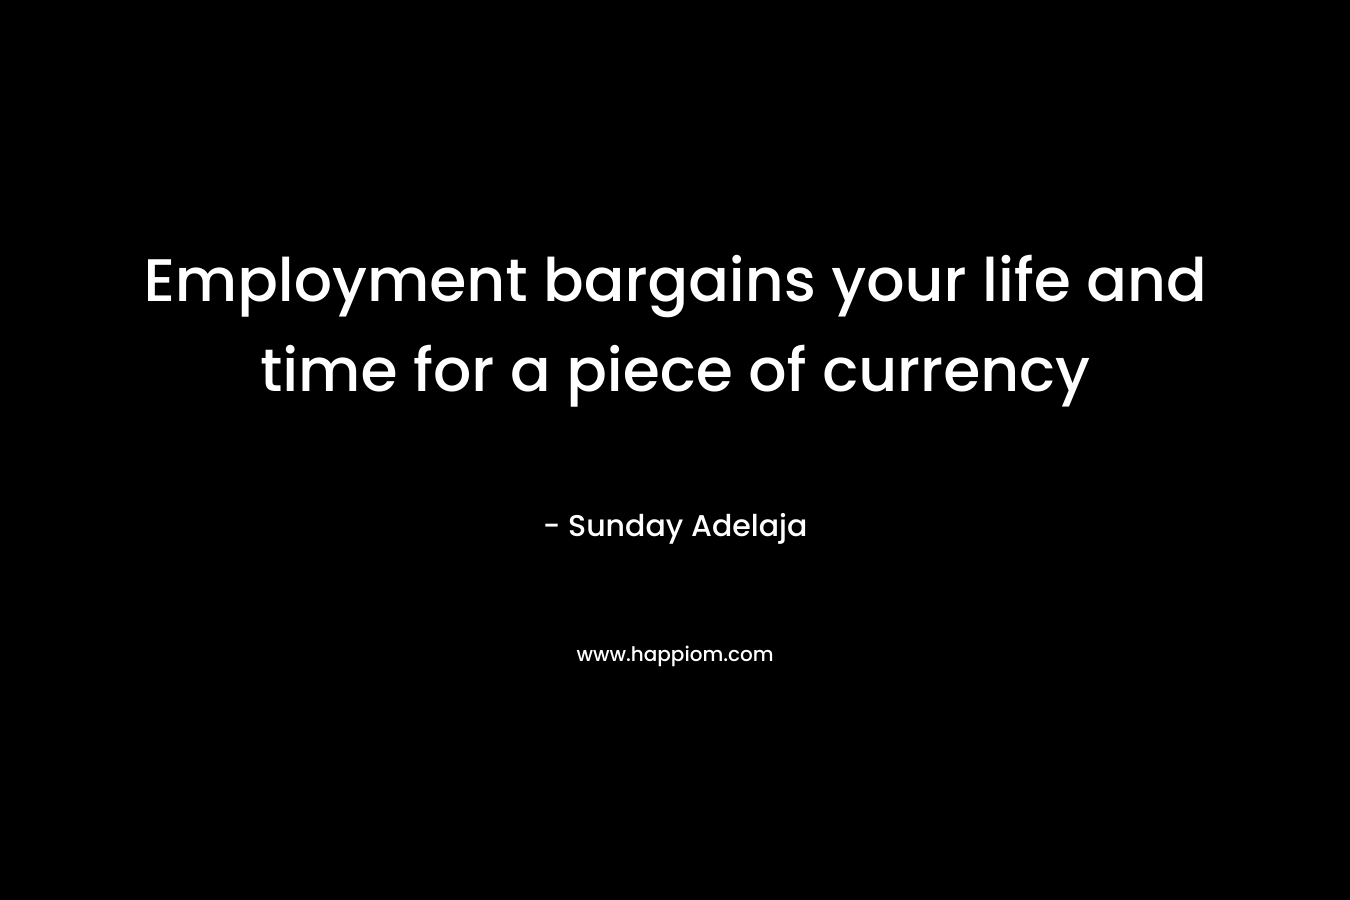 Employment bargains your life and time for a piece of currency